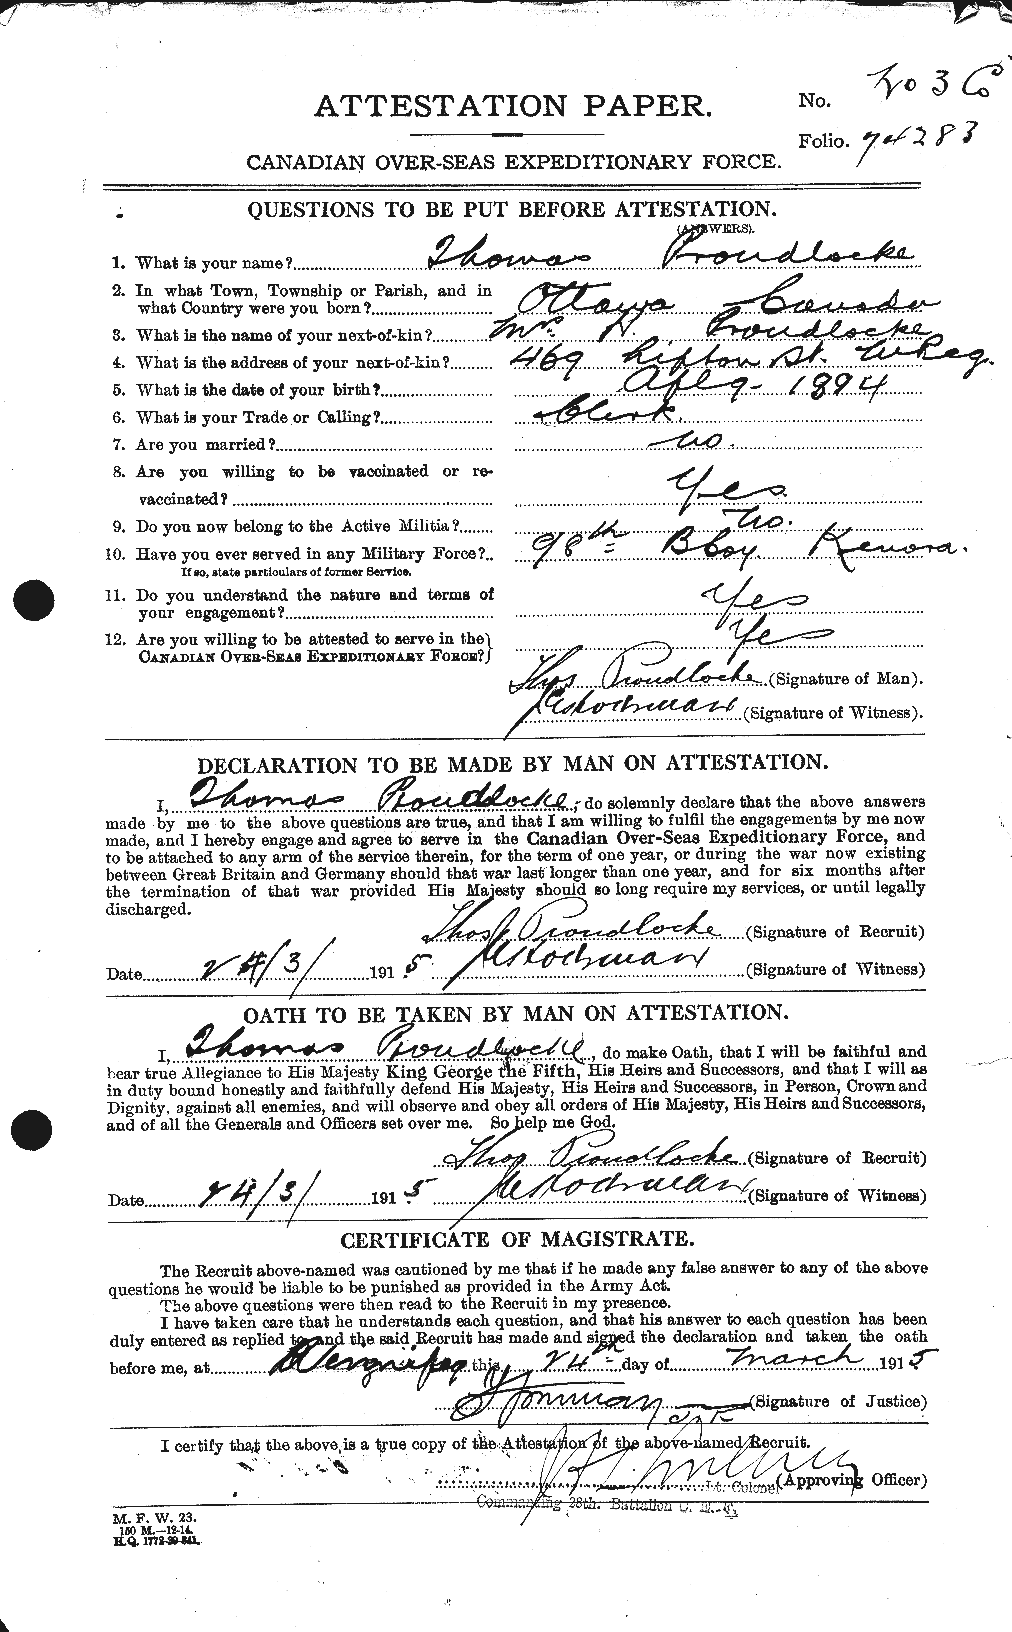 Personnel Records of the First World War - CEF 591487a